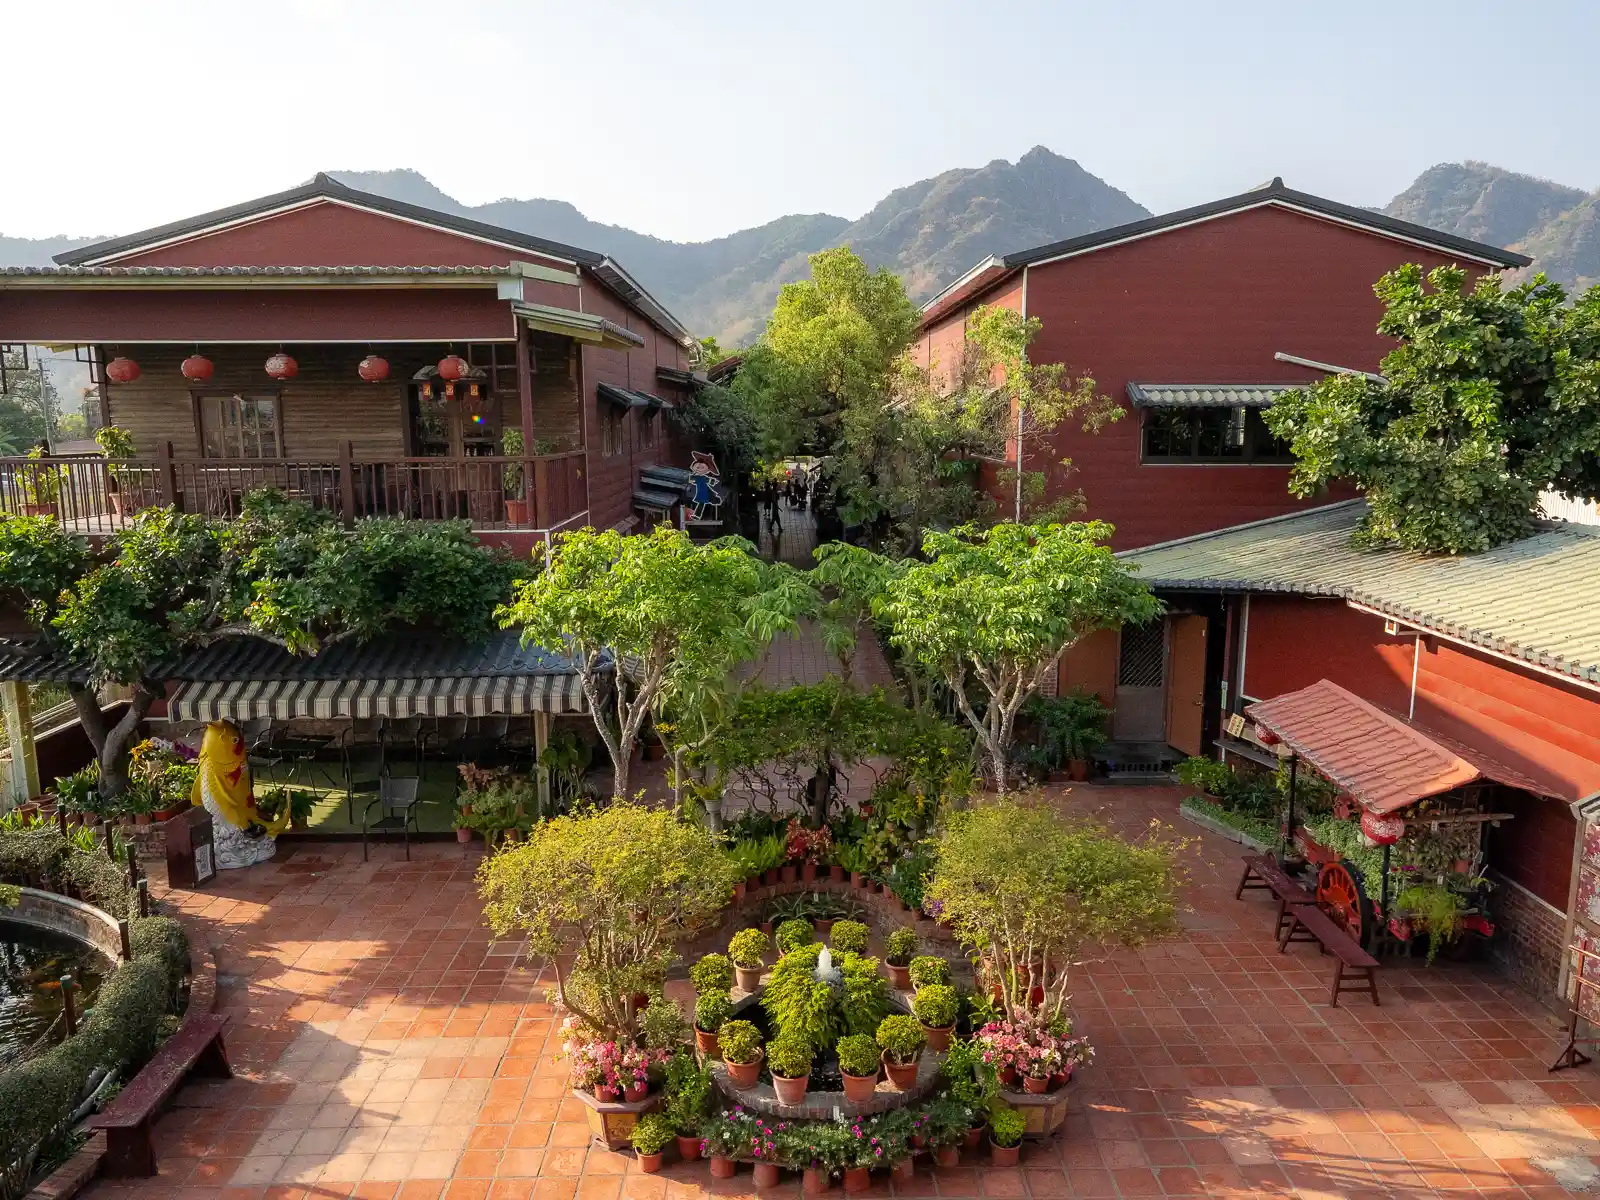 The courtyard garden and red barns of Meinong Folk Village are seen below.